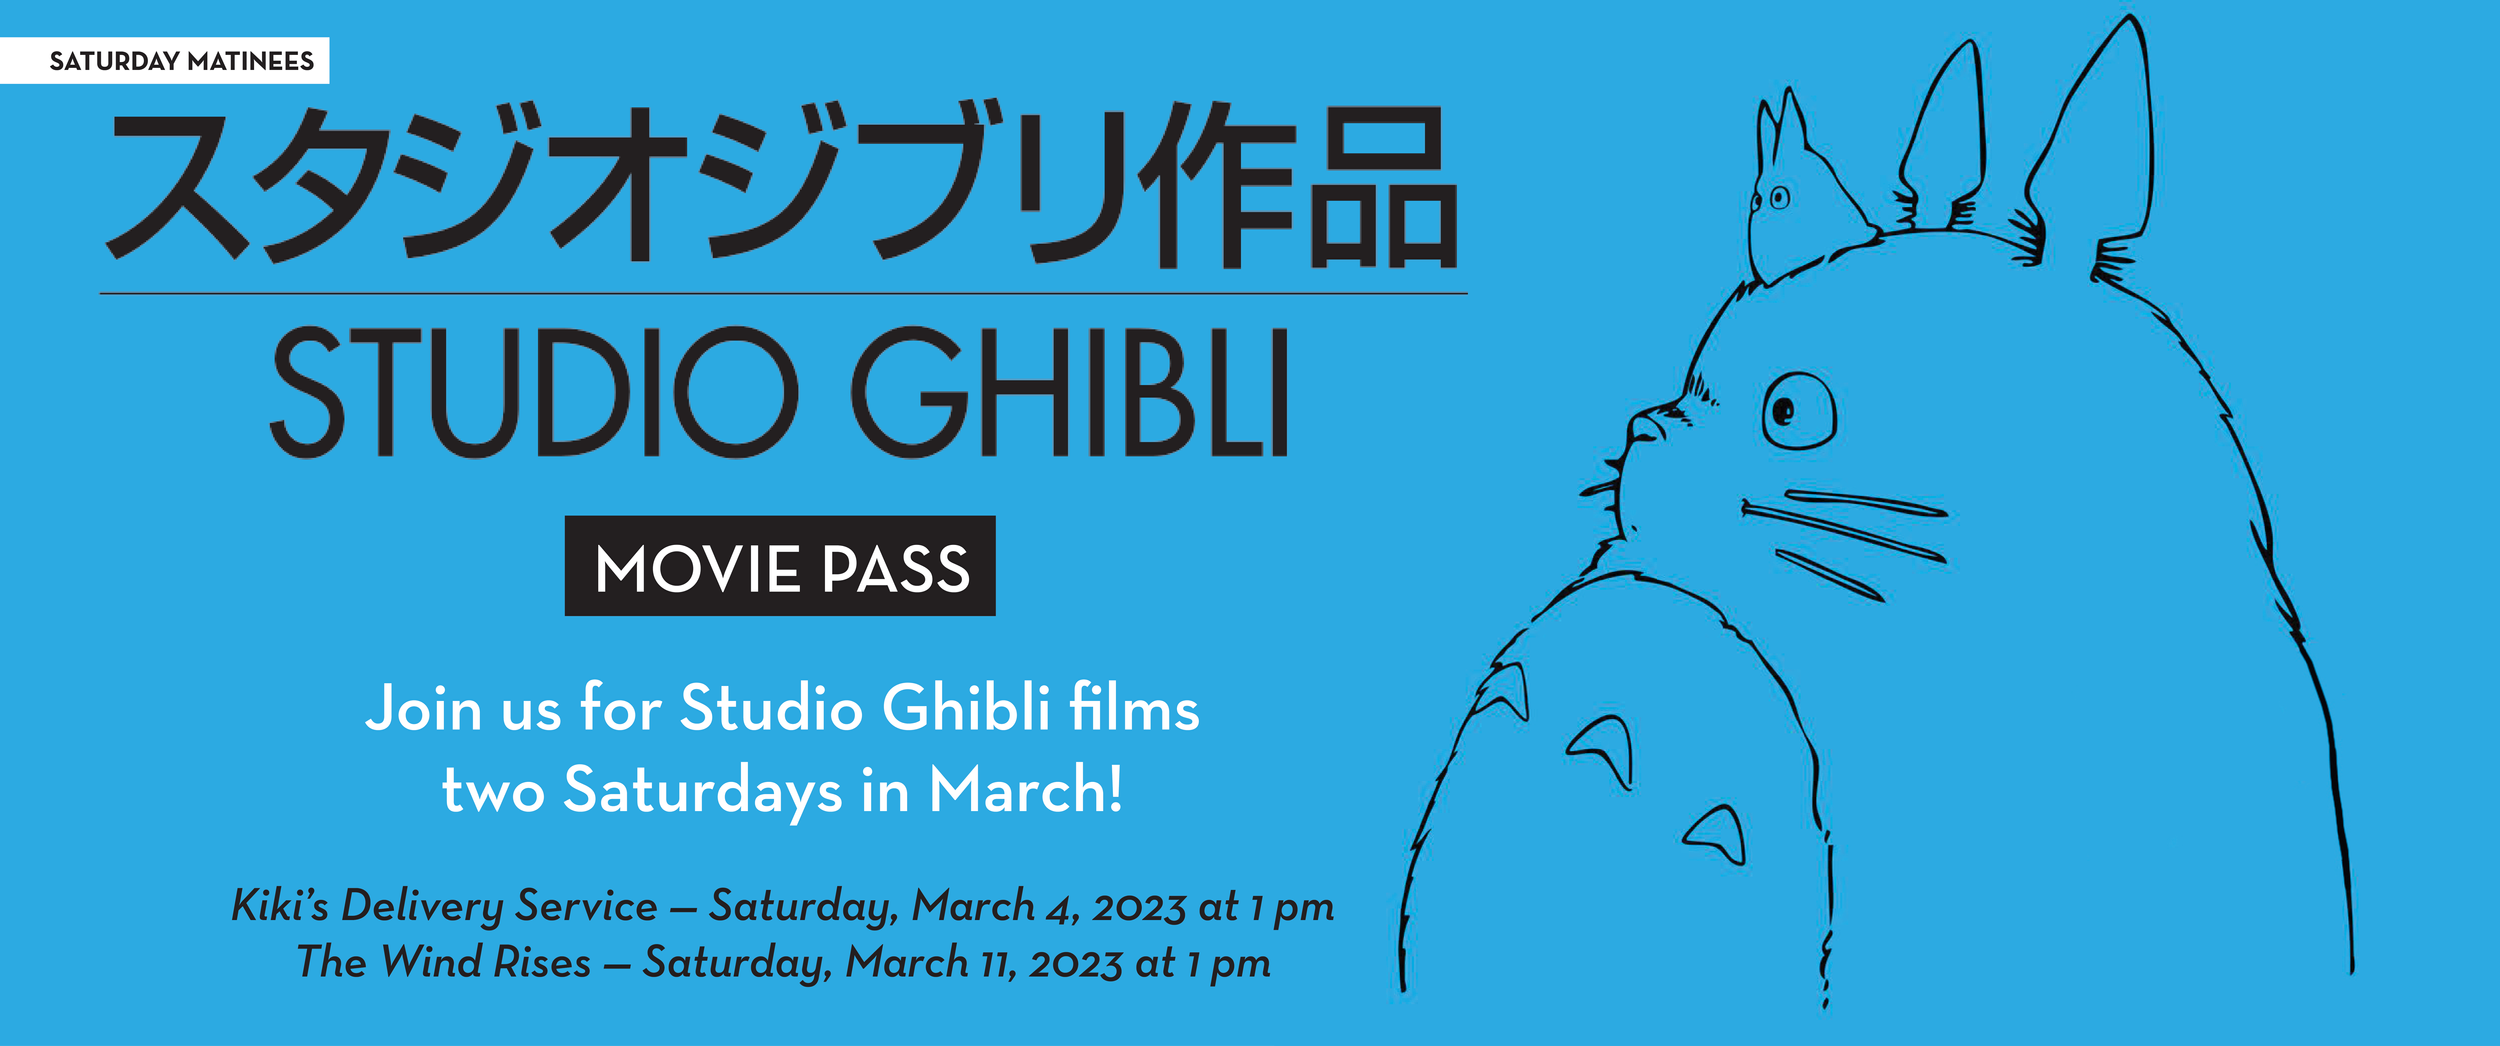 Studio Ghibli Matinees at The Parkway // All Movie Pass